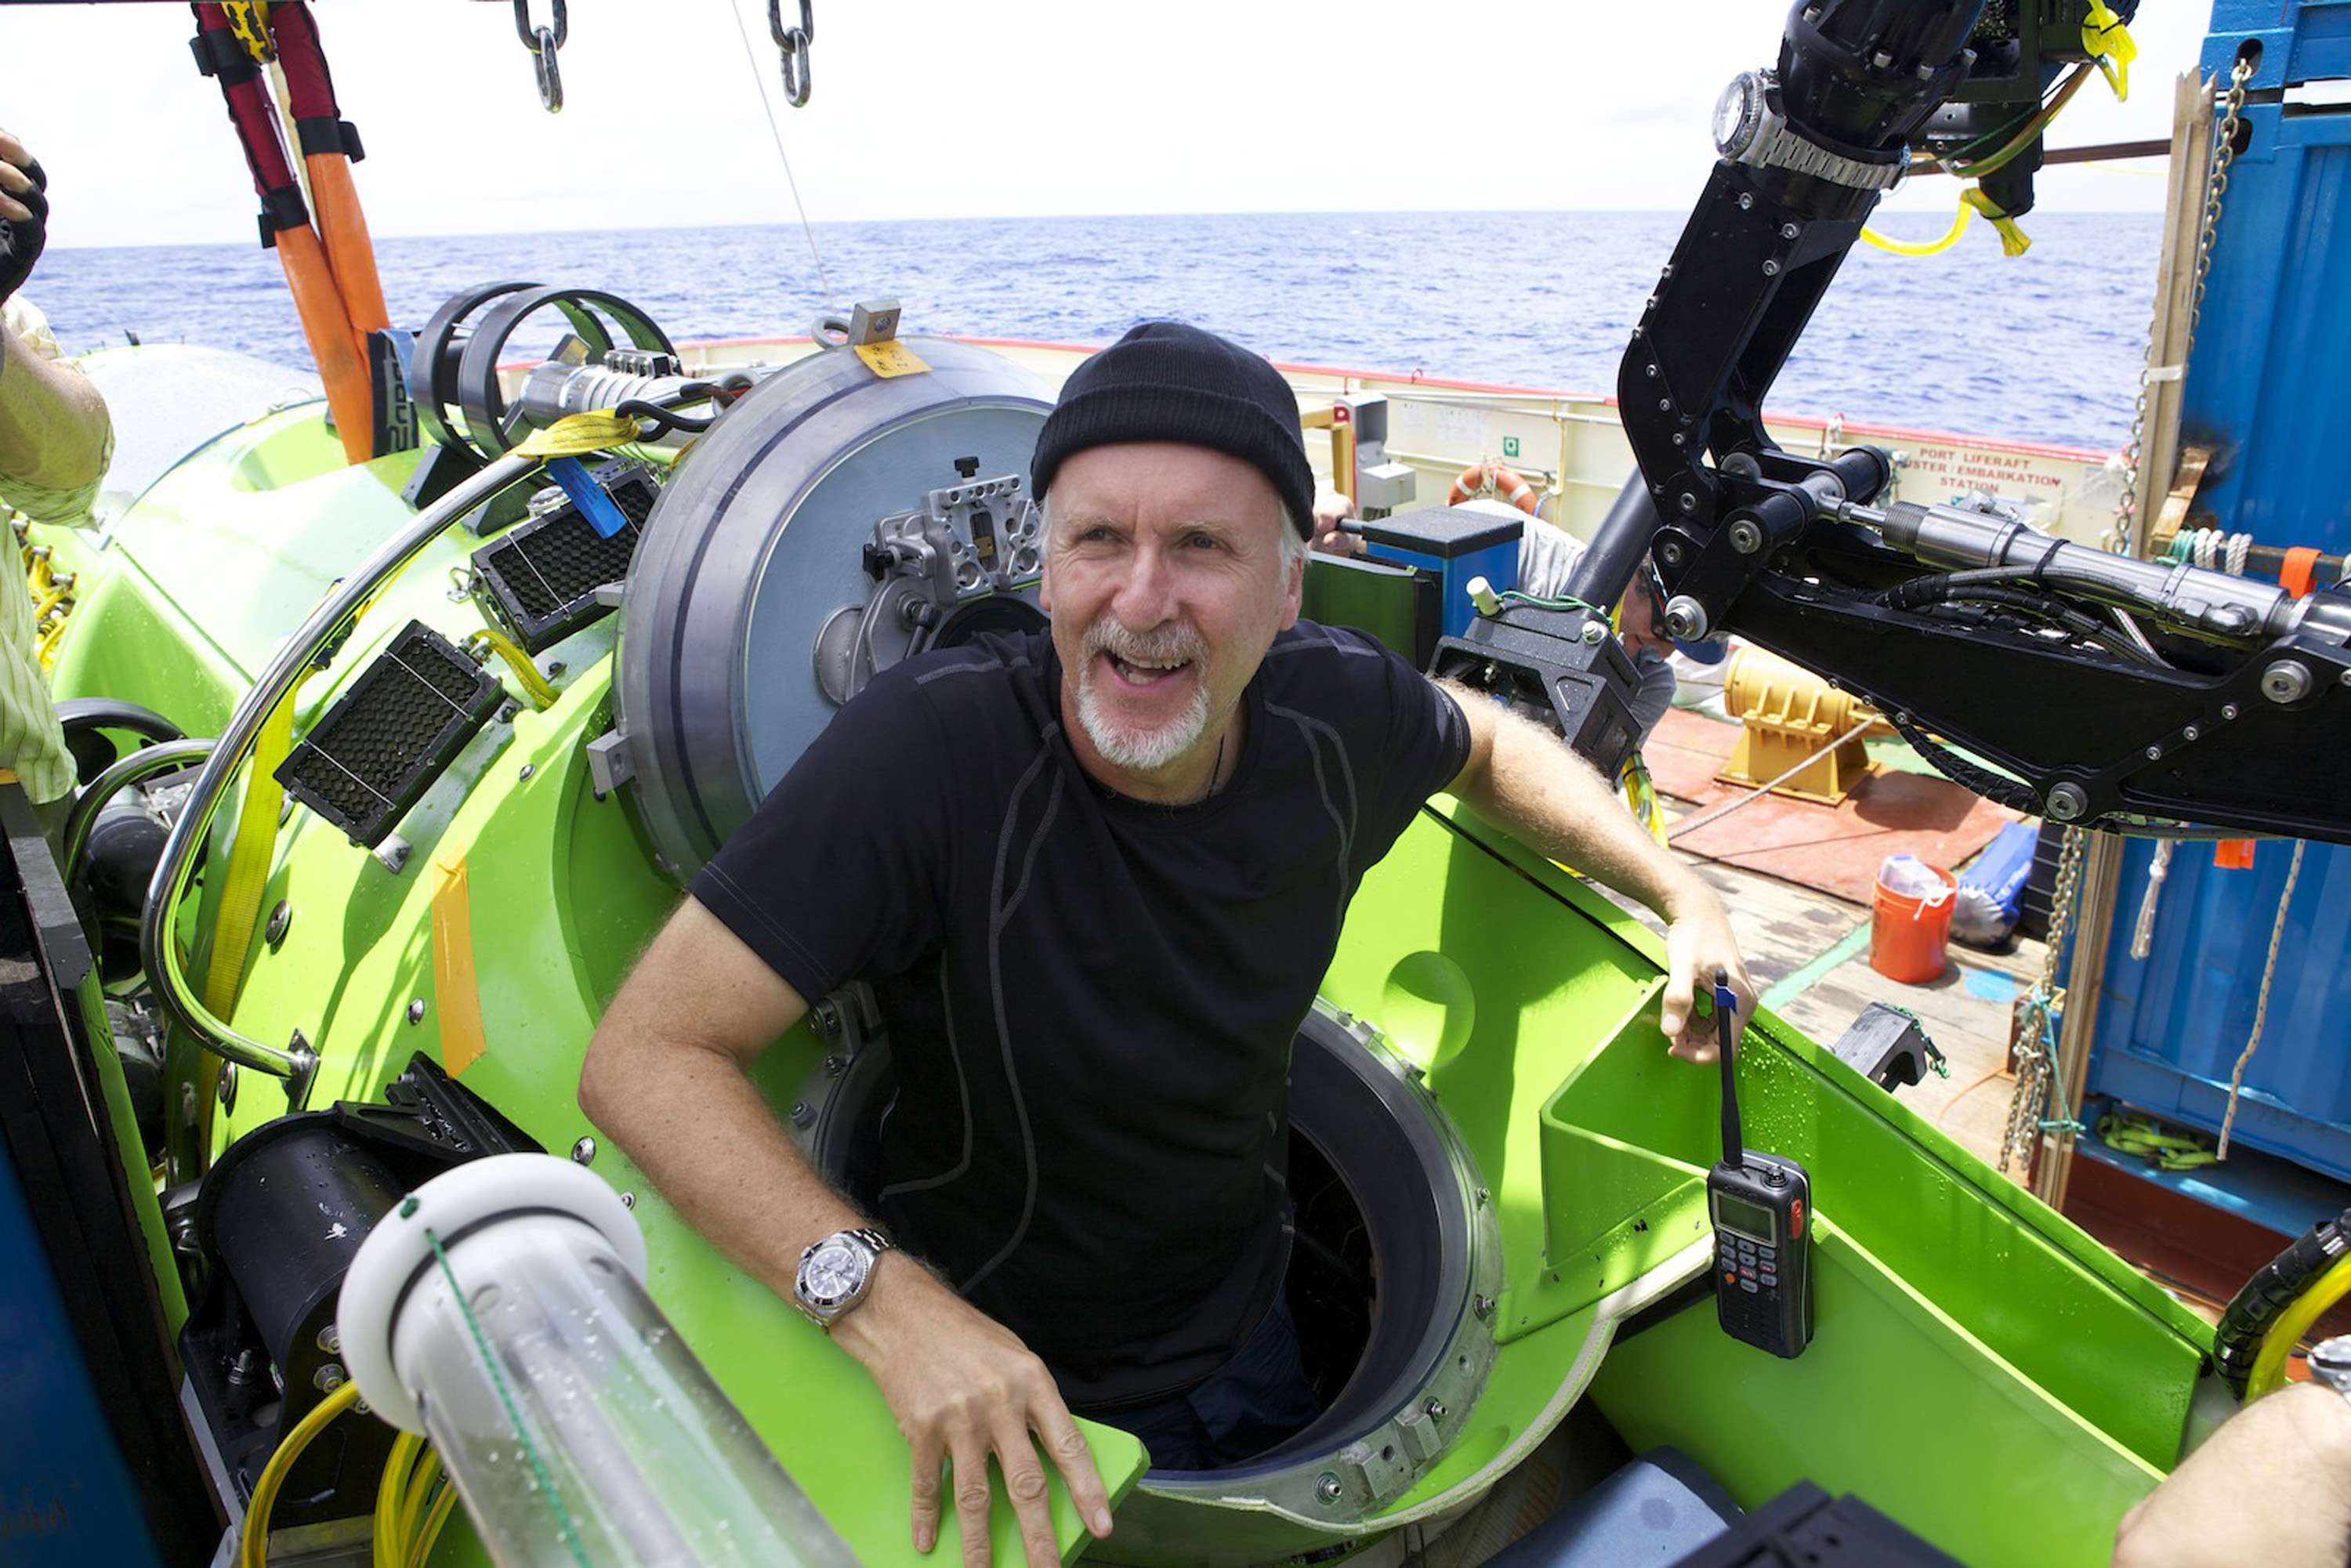 James Cameron made the movie Titanic to get a dive to the shipwreck funded by the movie studio; not because he particularly wanted to make the movie.

CAMERON: I made Titanic because I wanted to dive to the shipwreck, not because I particularly wanted to make the movie. The Titanic was the Mount Everest of shipwrecks, and as a diver I wanted to do it right. When I learned some other guys had dived to the Titanic to make an IMAX movie, I said, “I’ll make a Hollywood movie to pay for an expedition and do the same thing.” I loved that first taste, and I wanted more.